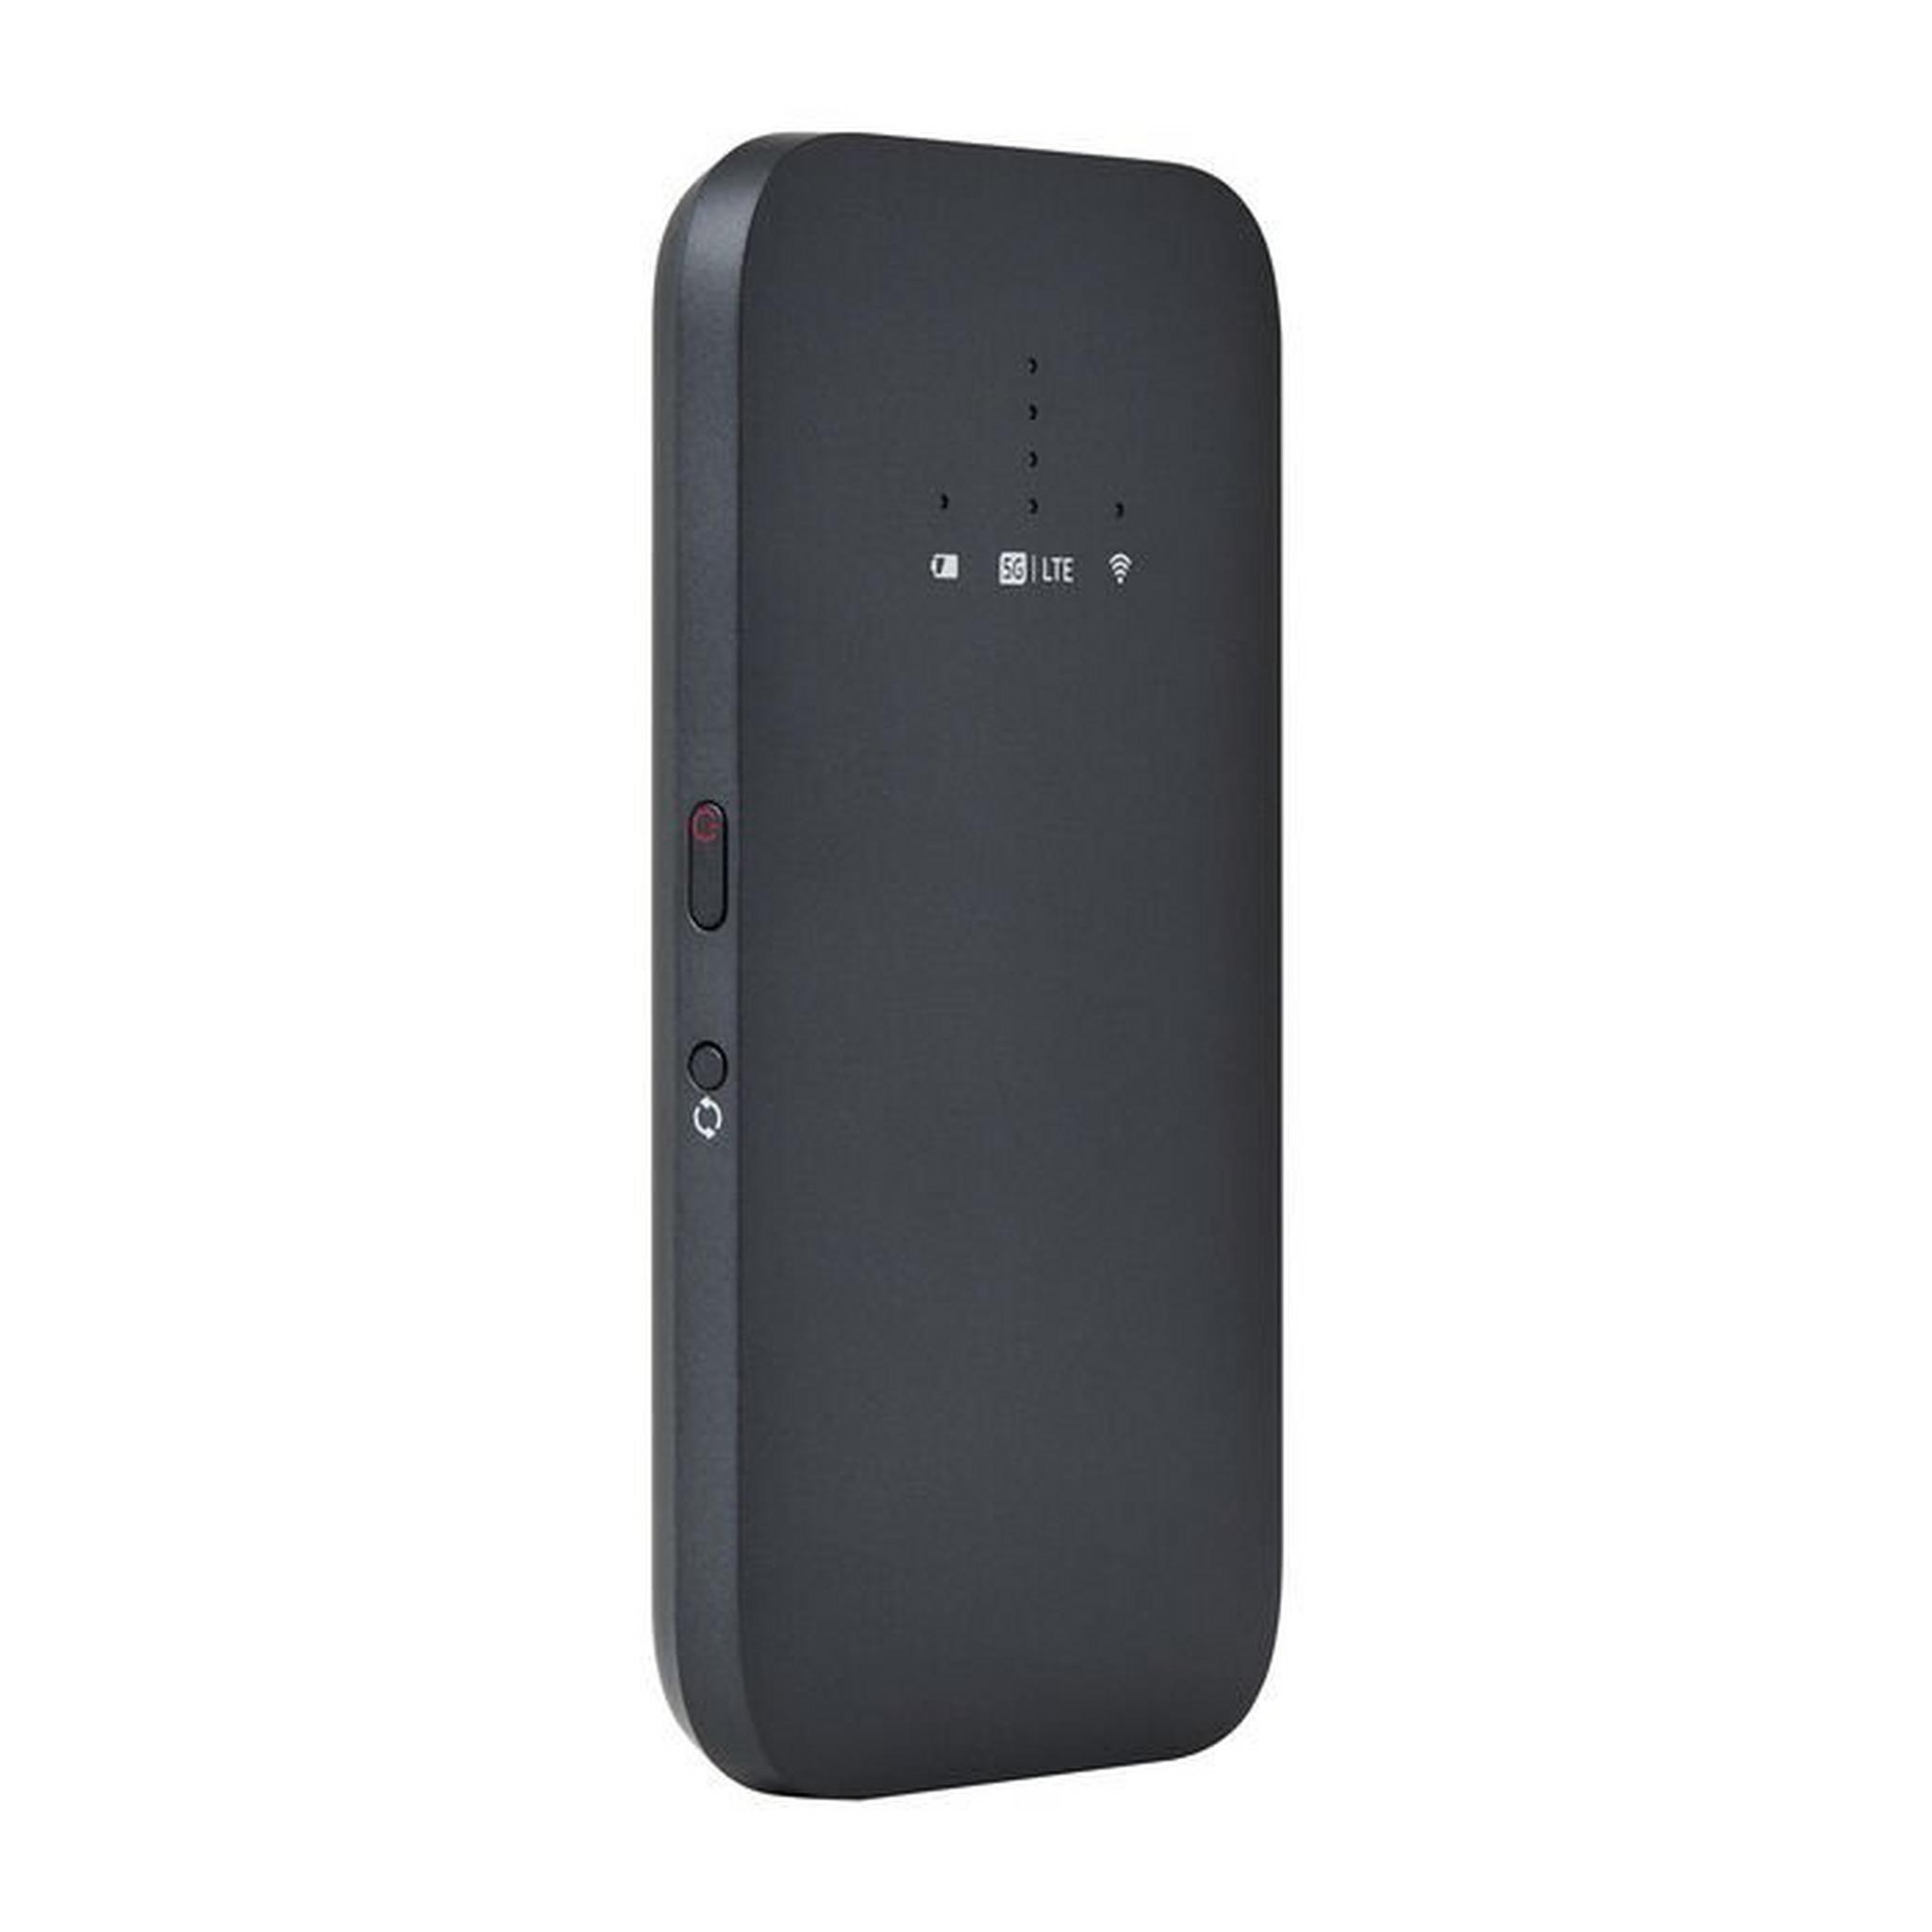 Linksys 5G Mobile Portable Router, Speeds up to 1.8Gbps, FGHSAX1800-ME - Black